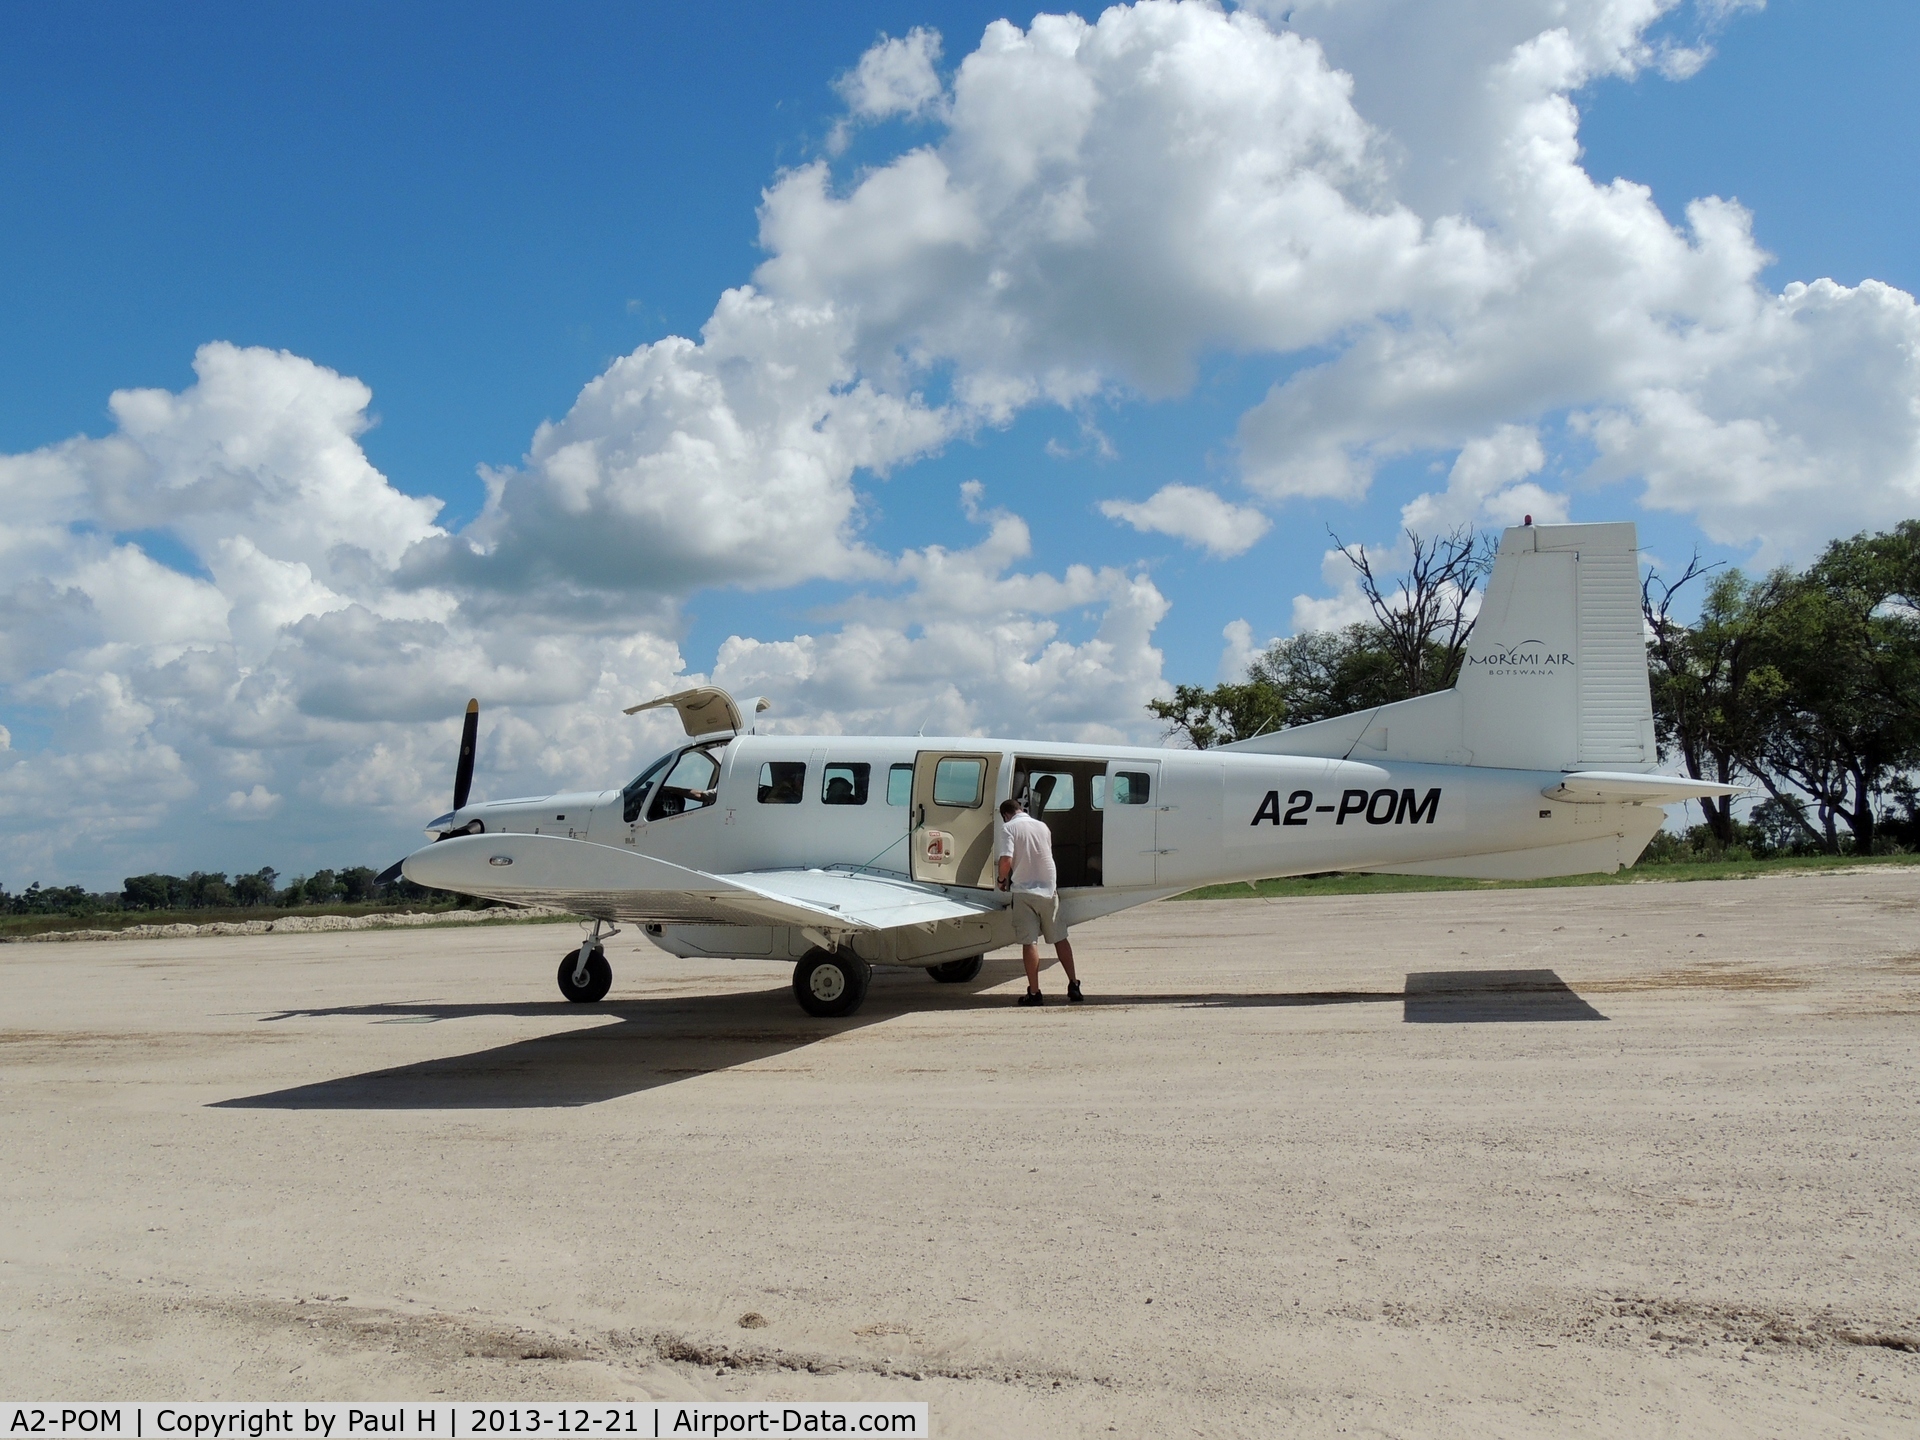 A2-POM, Pacific Aerospace 750XL C/N 131, At the Airstrip of Gunns Camp in Botswana